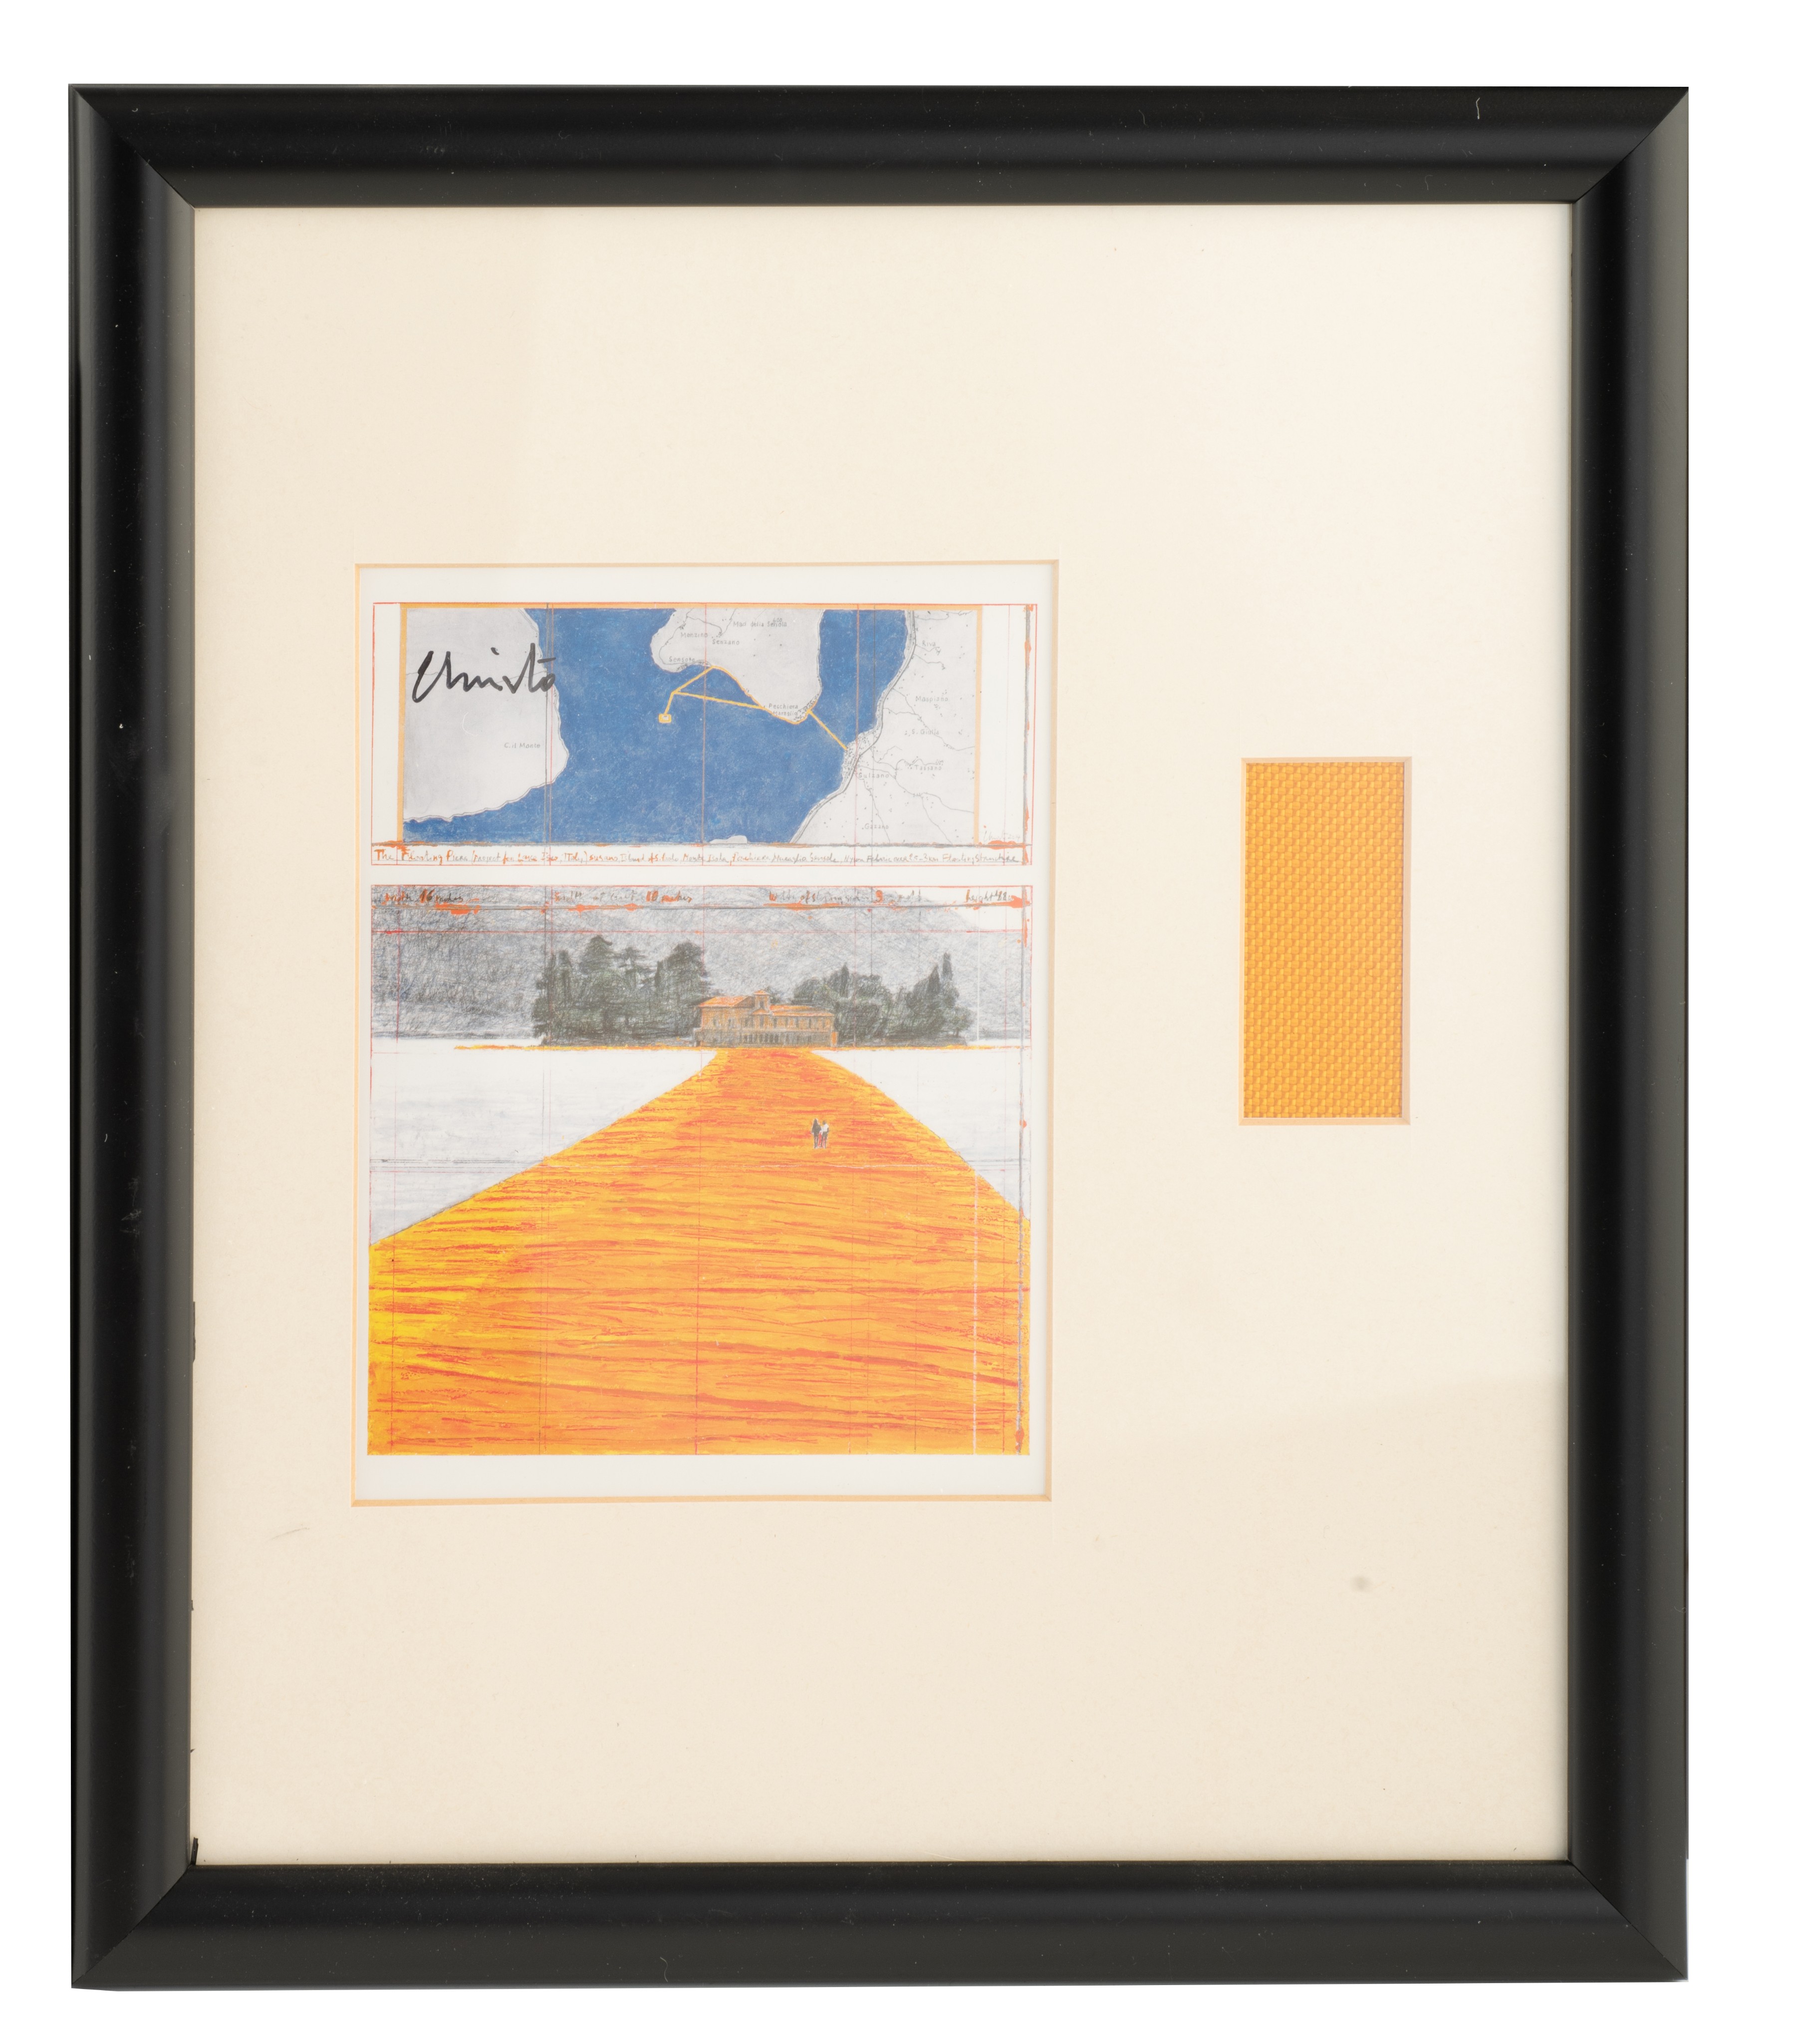 (BIDDING ONLY ON CARLOBONTE.BE) Christo and Jeanne-Claude, three signed offsets of their famous proj - Image 4 of 8